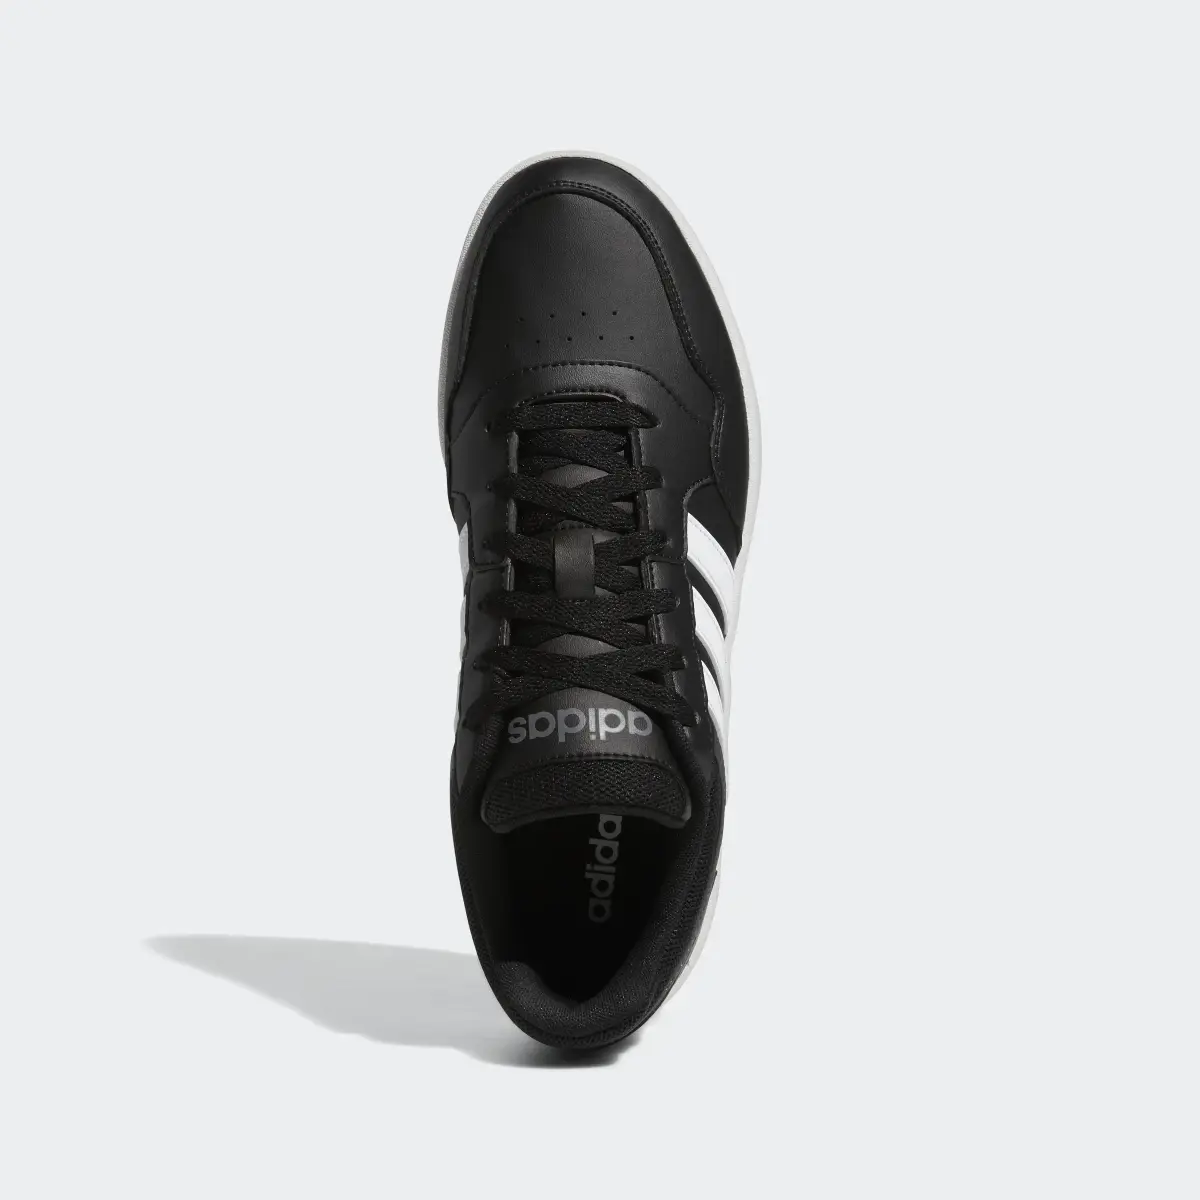 Adidas Hoops 3.0 Low Classic Vintage Schuh. 3